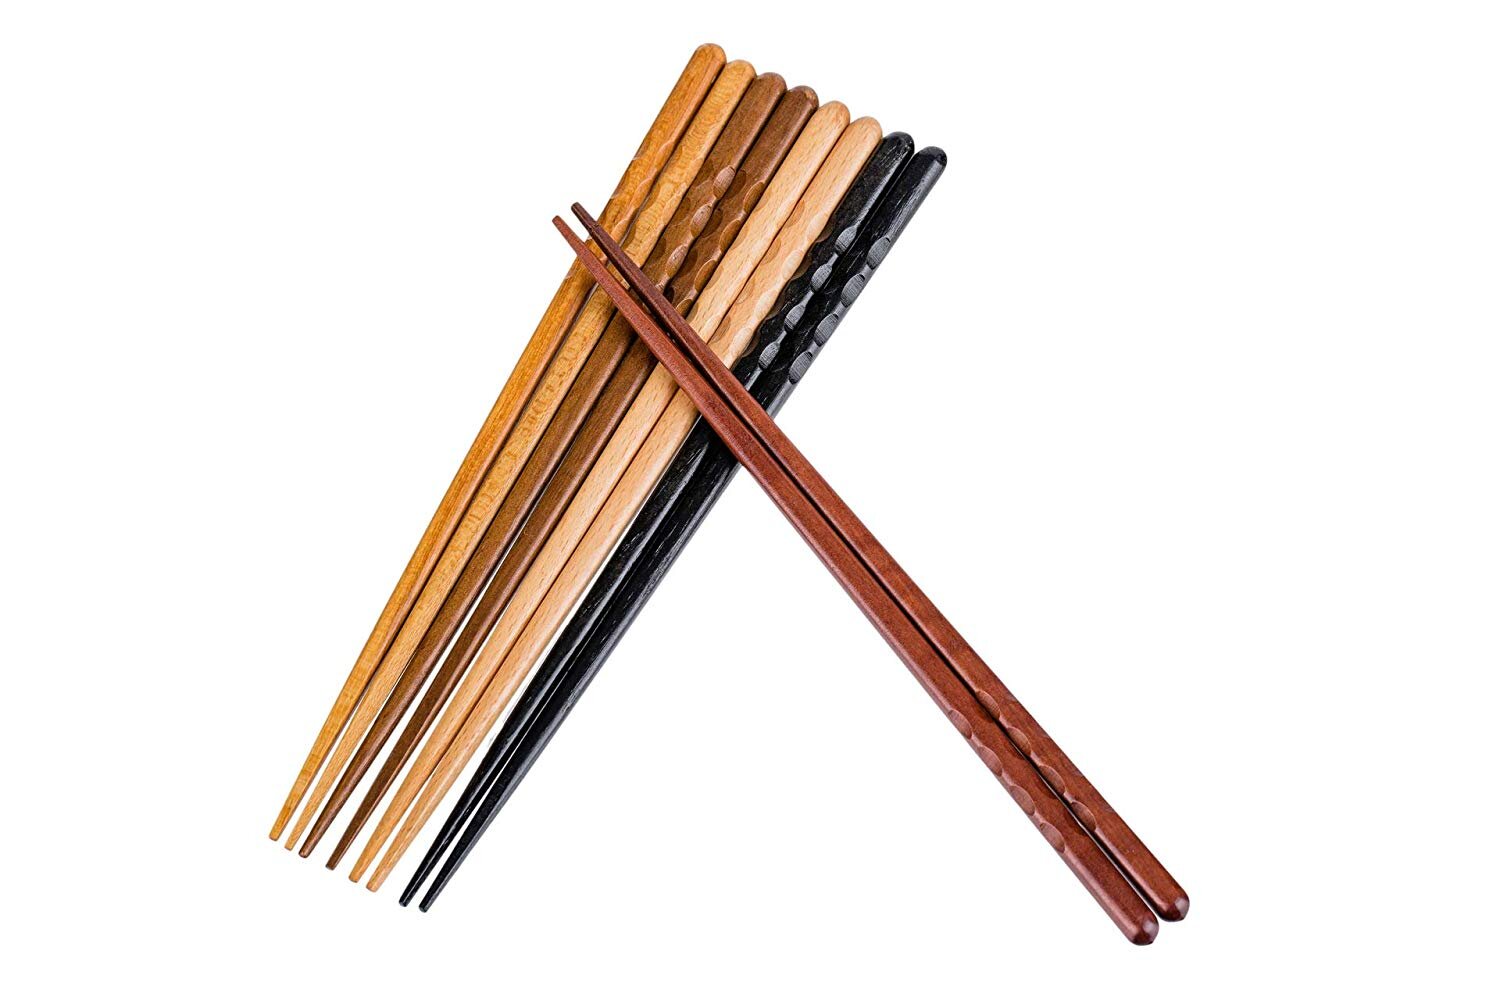 Luxury Personalised Wooden Chopsticks Gift By Natural Gift Store